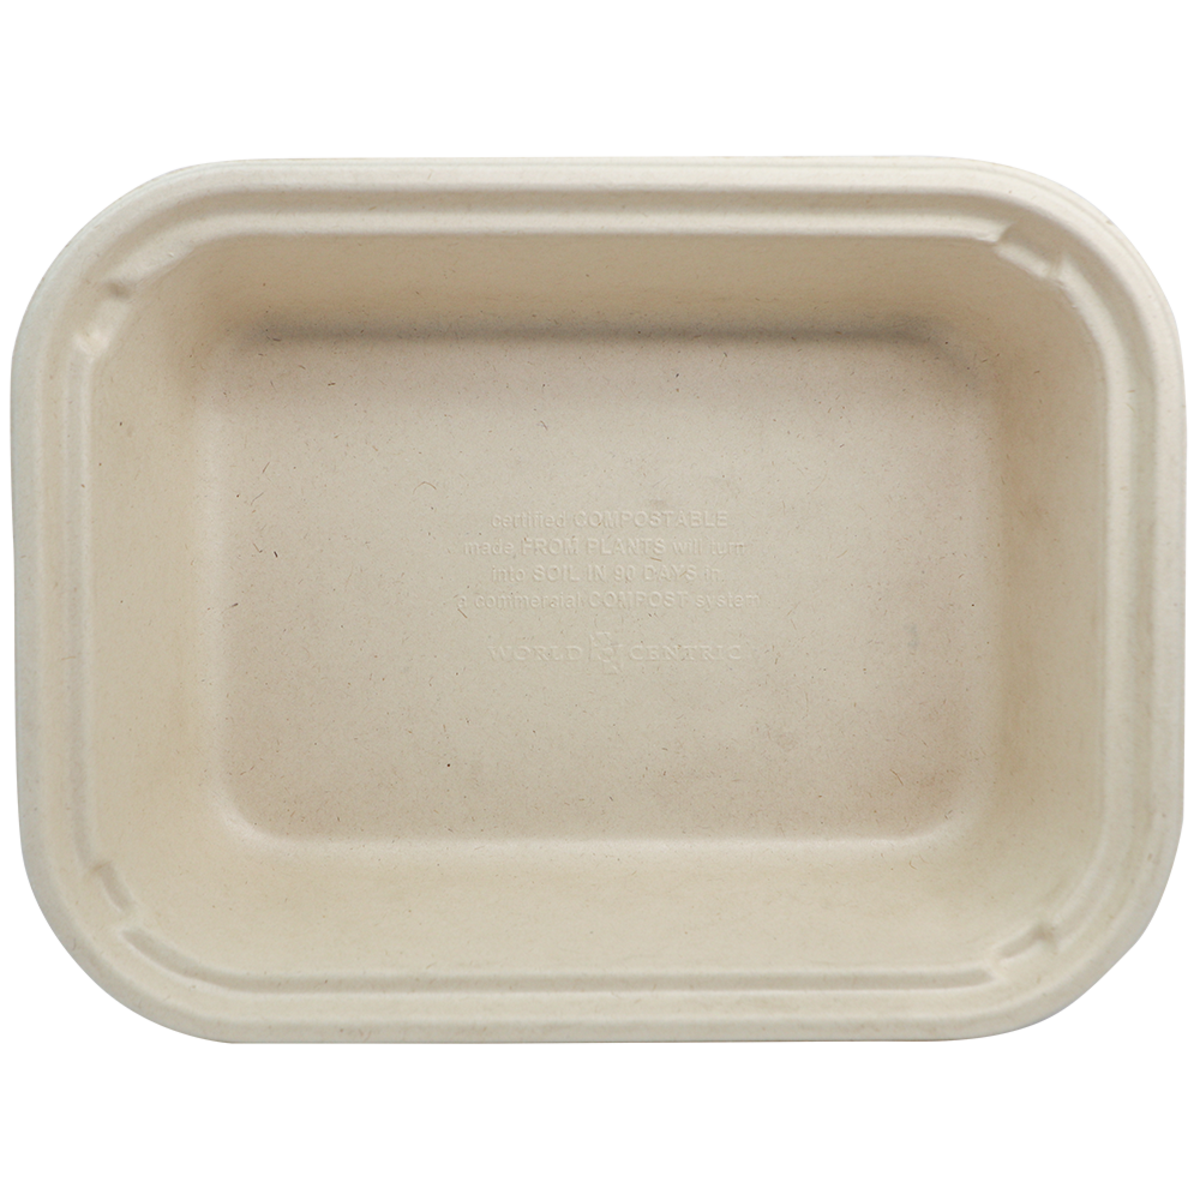 60 oz Fiber To Go Container | 10" x 7.5" x 2.5" | Compostable (Pack of 200)